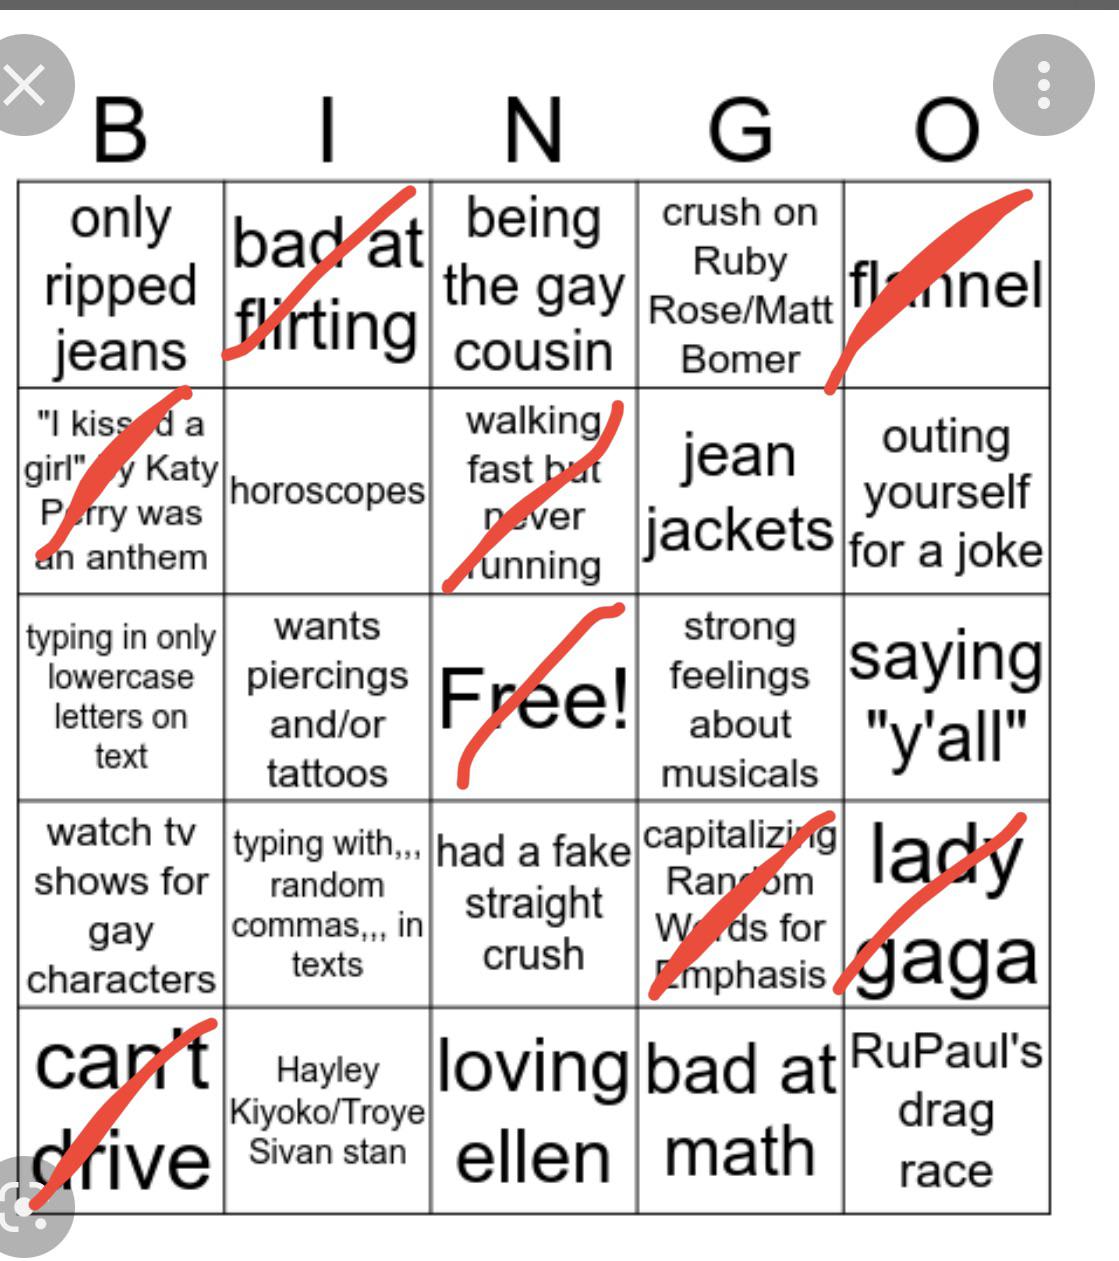 I’m sorry everyone but according to the bingo results I am straight